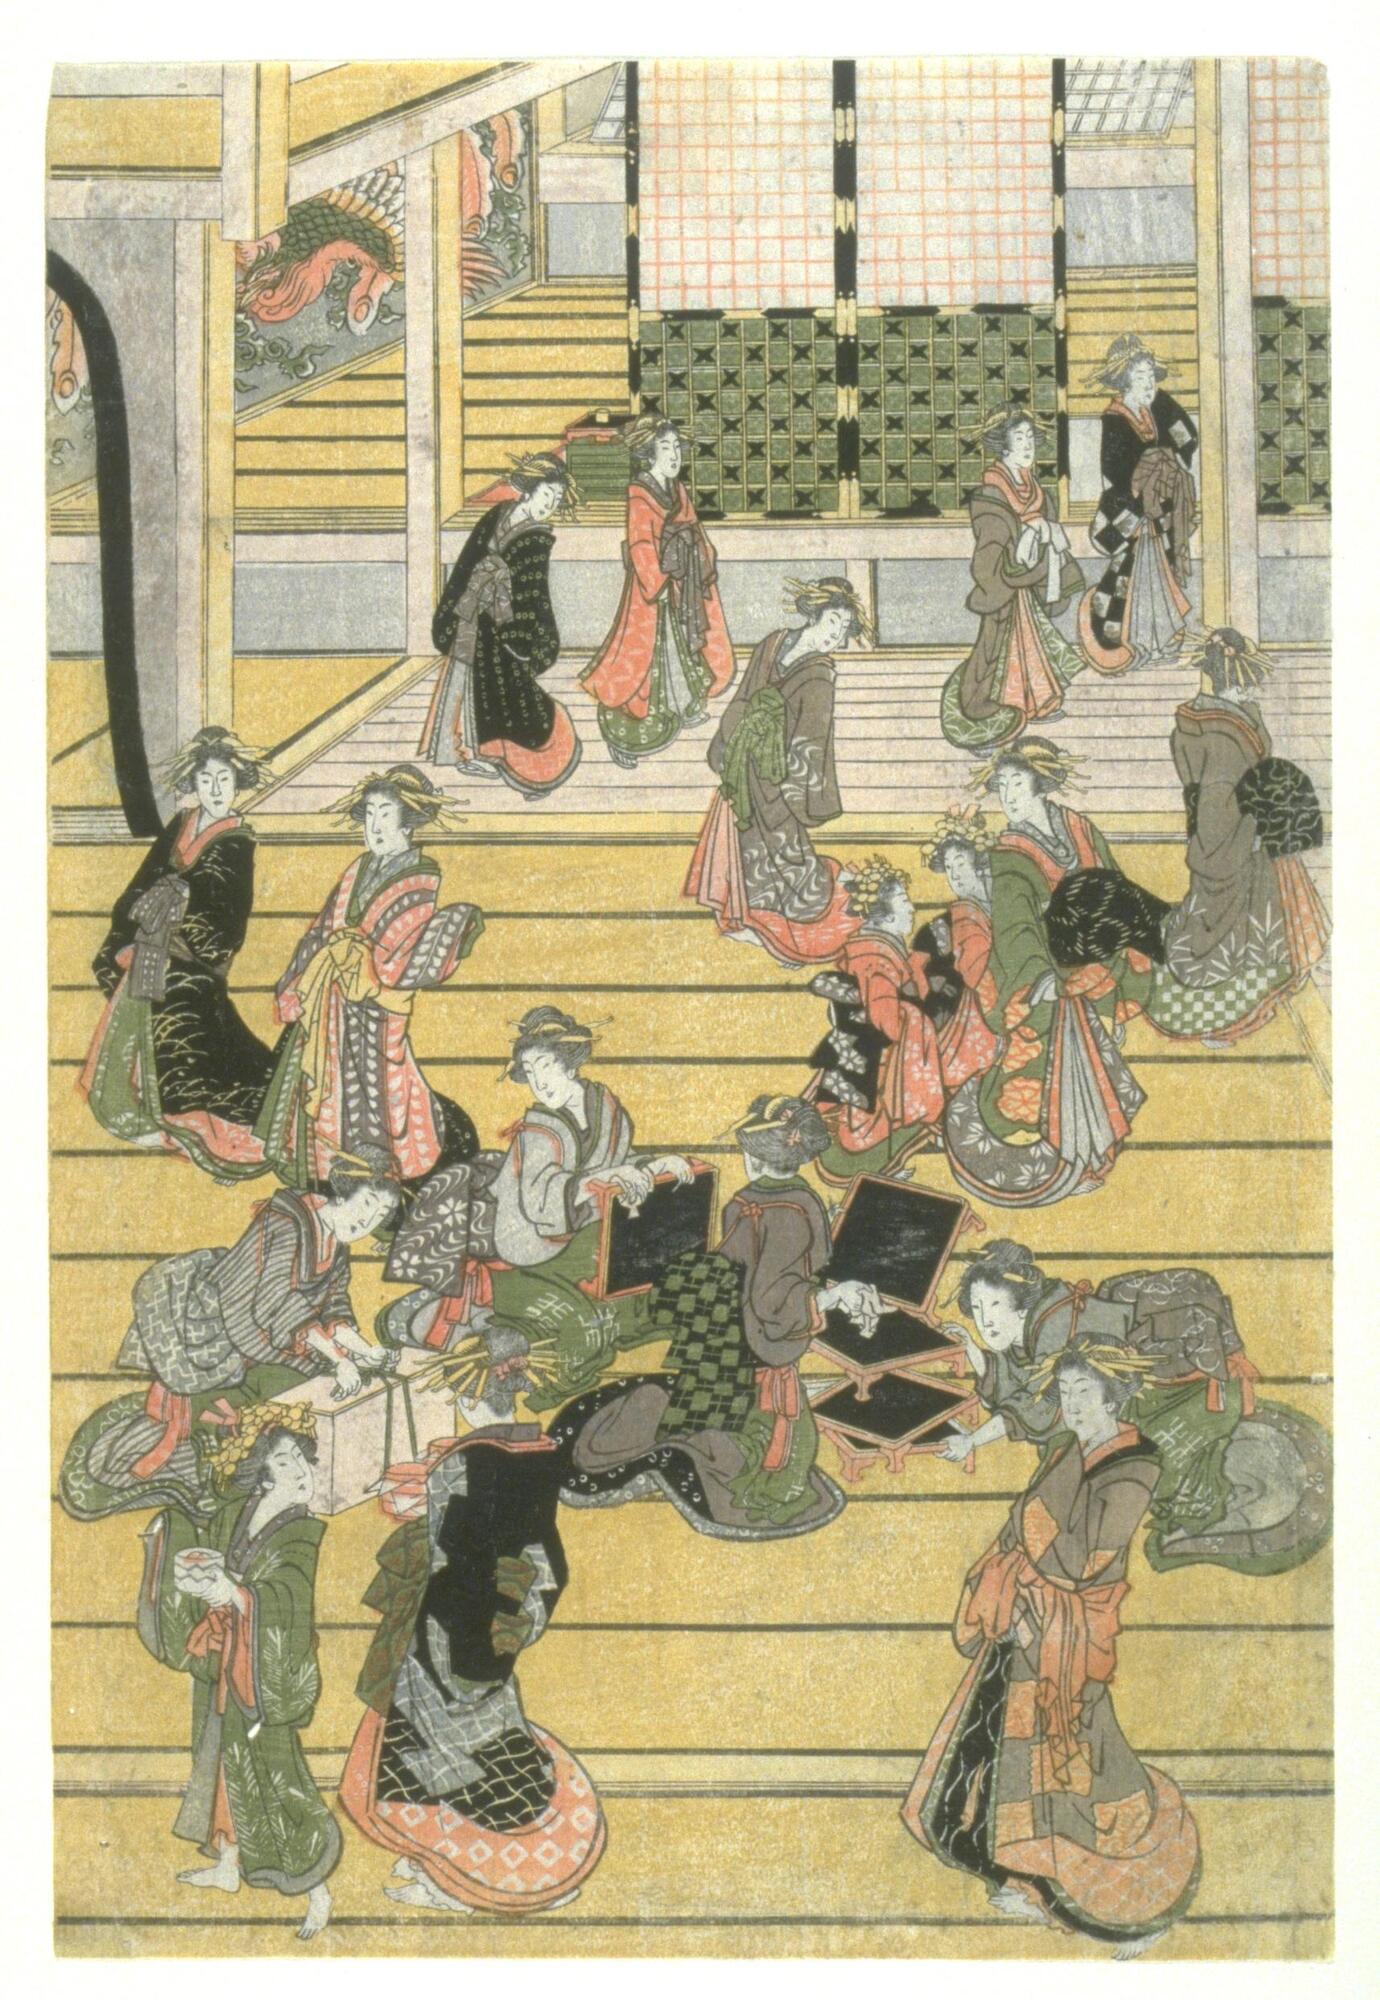 ;A group of 18 women inside a building wearing various kimono with the predominant colors being grey, red, black, and green. Some of the kimono also have orange coloring. The patterns and designs on the kimono vary from images of flowers to geometric designs. A rice paper door is seen in the background leading to a room at a slightly higher level and an image of a phoenix can be partially seen on the wall in the back and to the left. One of the women near the front is tying the string around a package while three other women near her are arranging small footed trays. One of the women in the forefront and to the left appears to be holding a cup or jar.